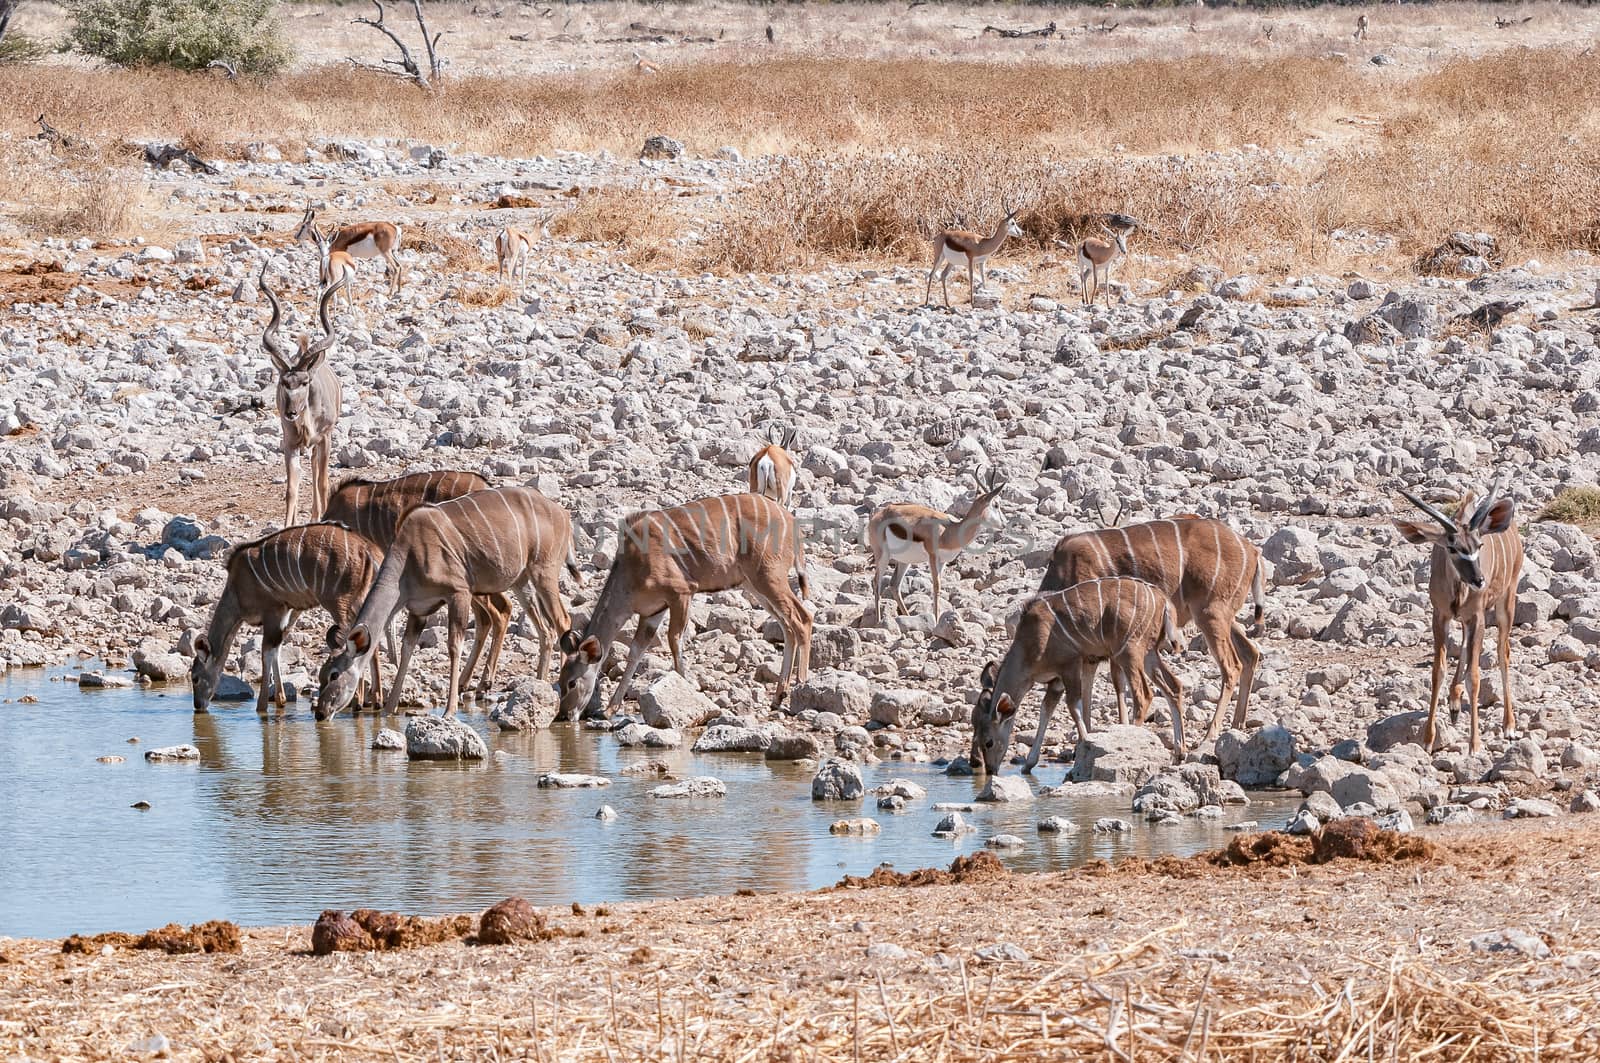 Kudus and springbok drinking water at a waterhole in northern Namibia